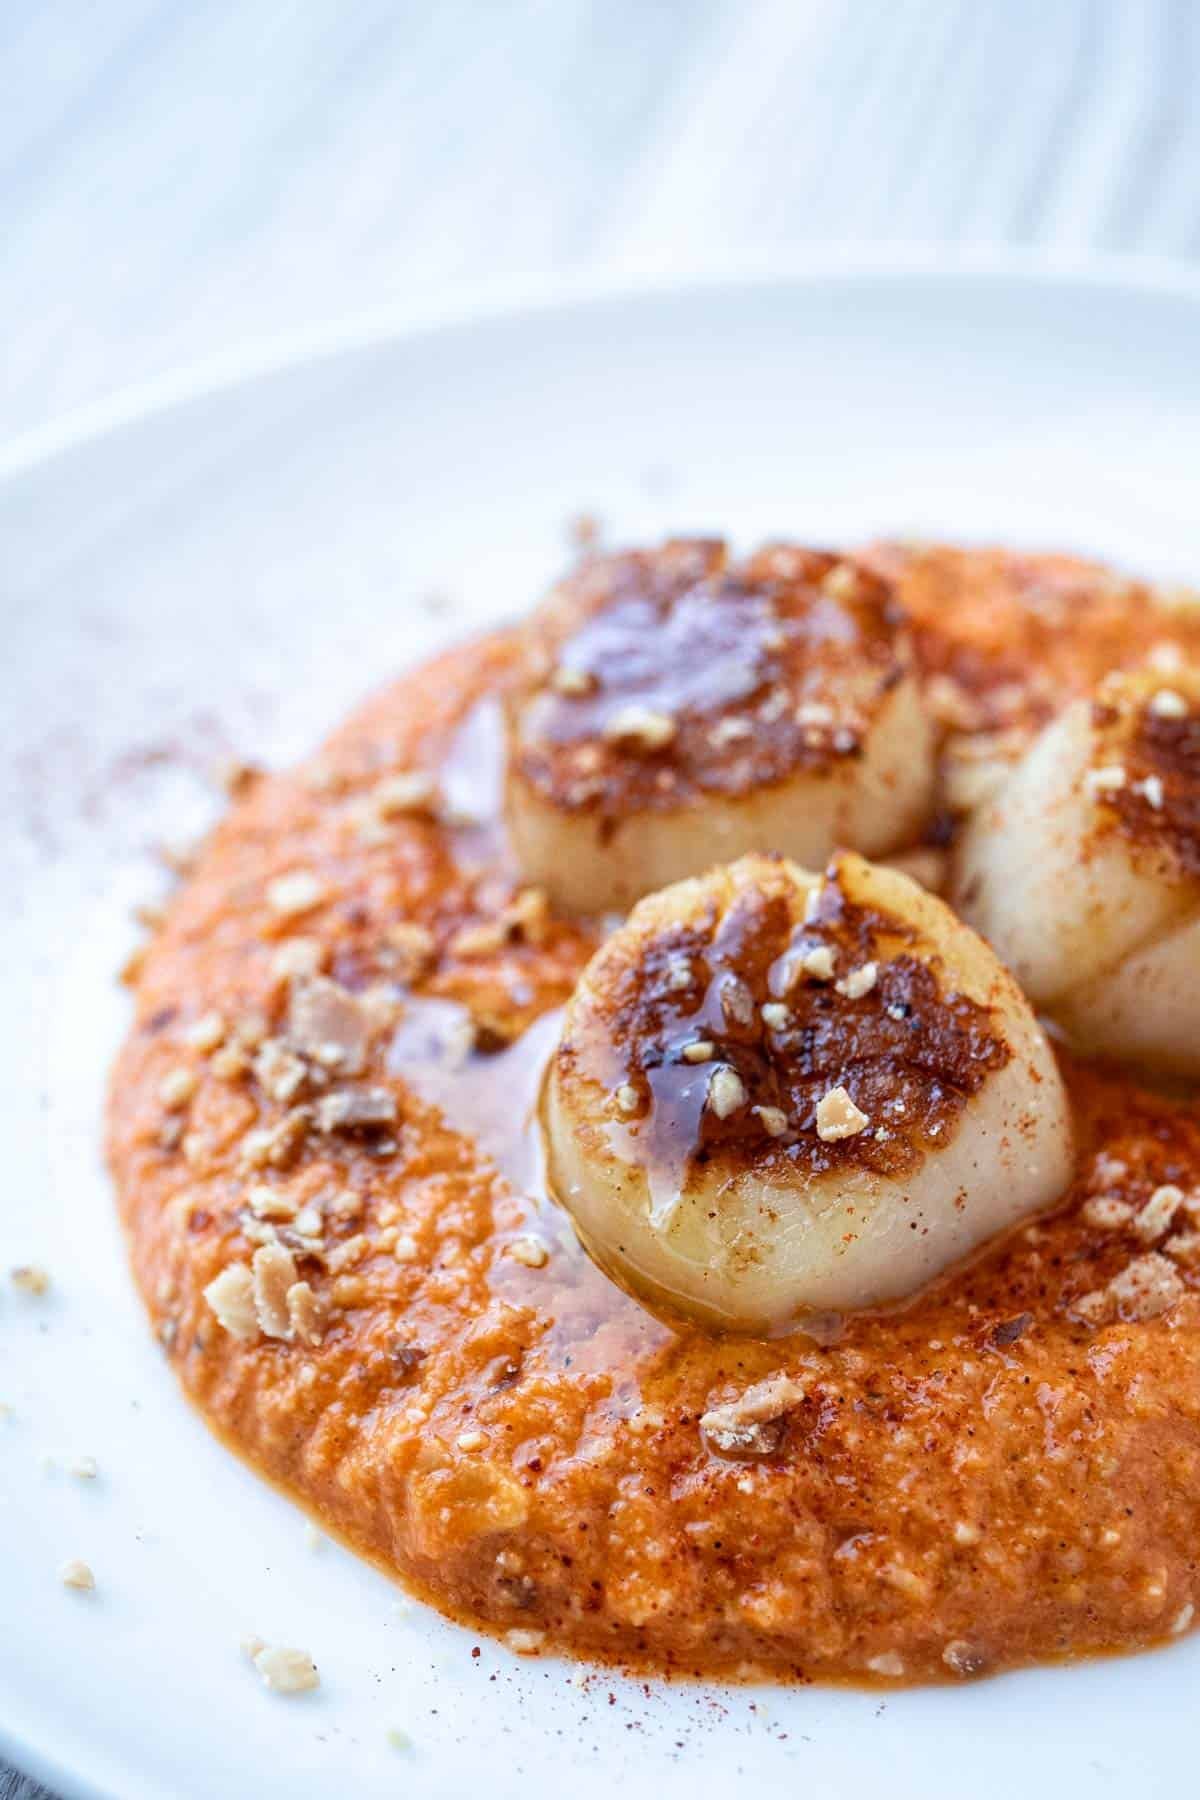 a close up of a plate of seared scallops served on a spicy red pepper sauced and garnished with crushed almonds.